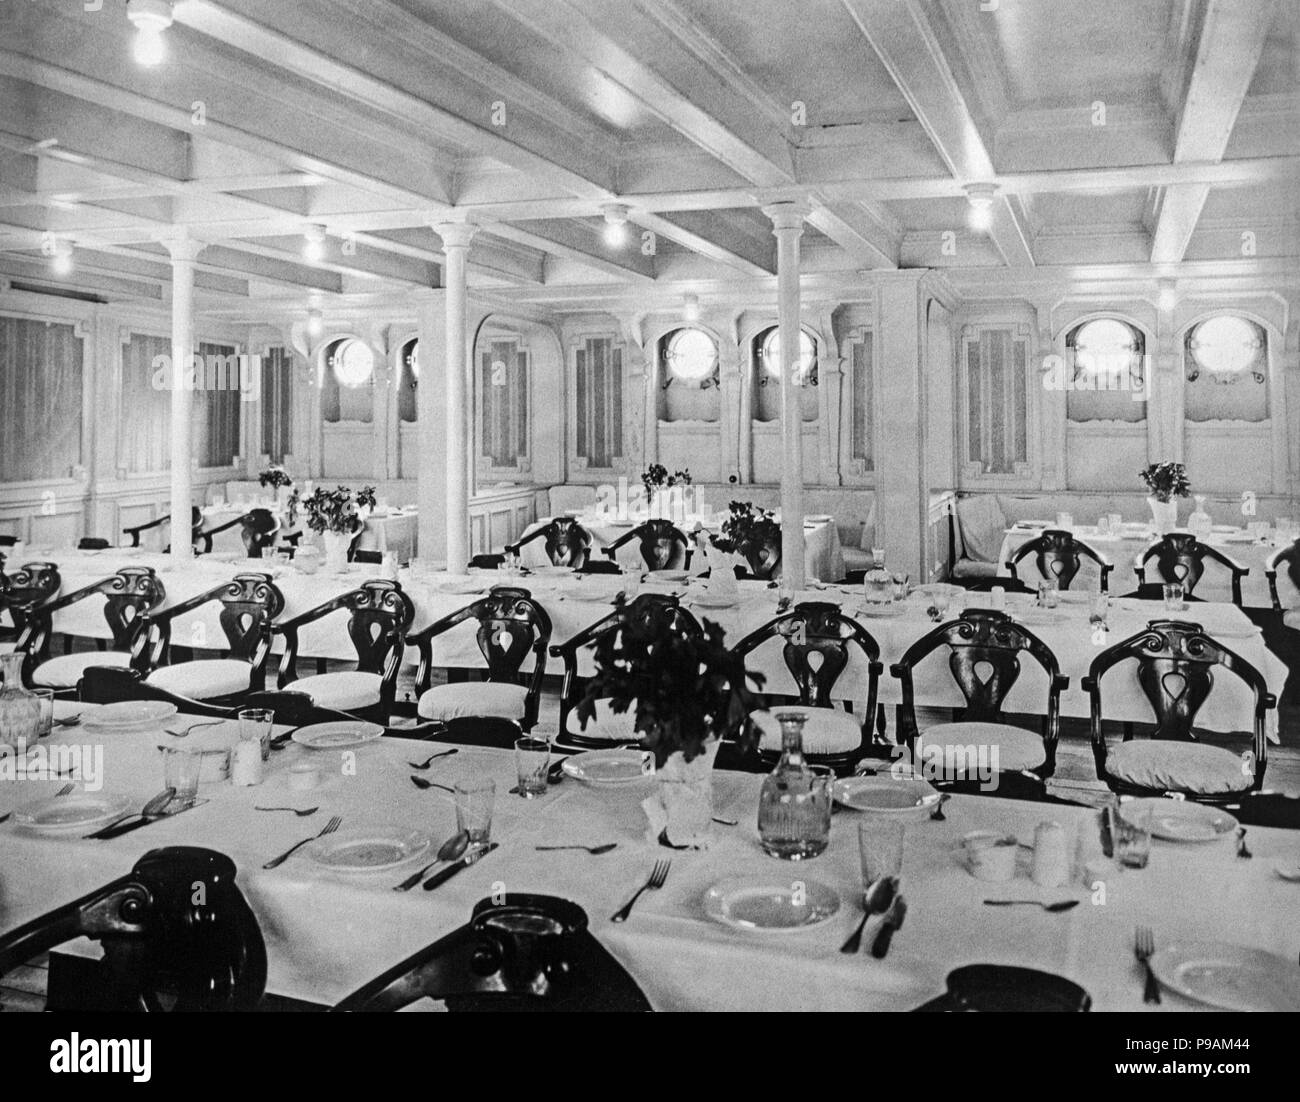 The third class dining area of the Red Star Line's S.S. Zealand, launched on 24 November 1900, making her maiden voyage from Antwerp to New York on 13 April 1901, sailing under the British flag. Stock Photo